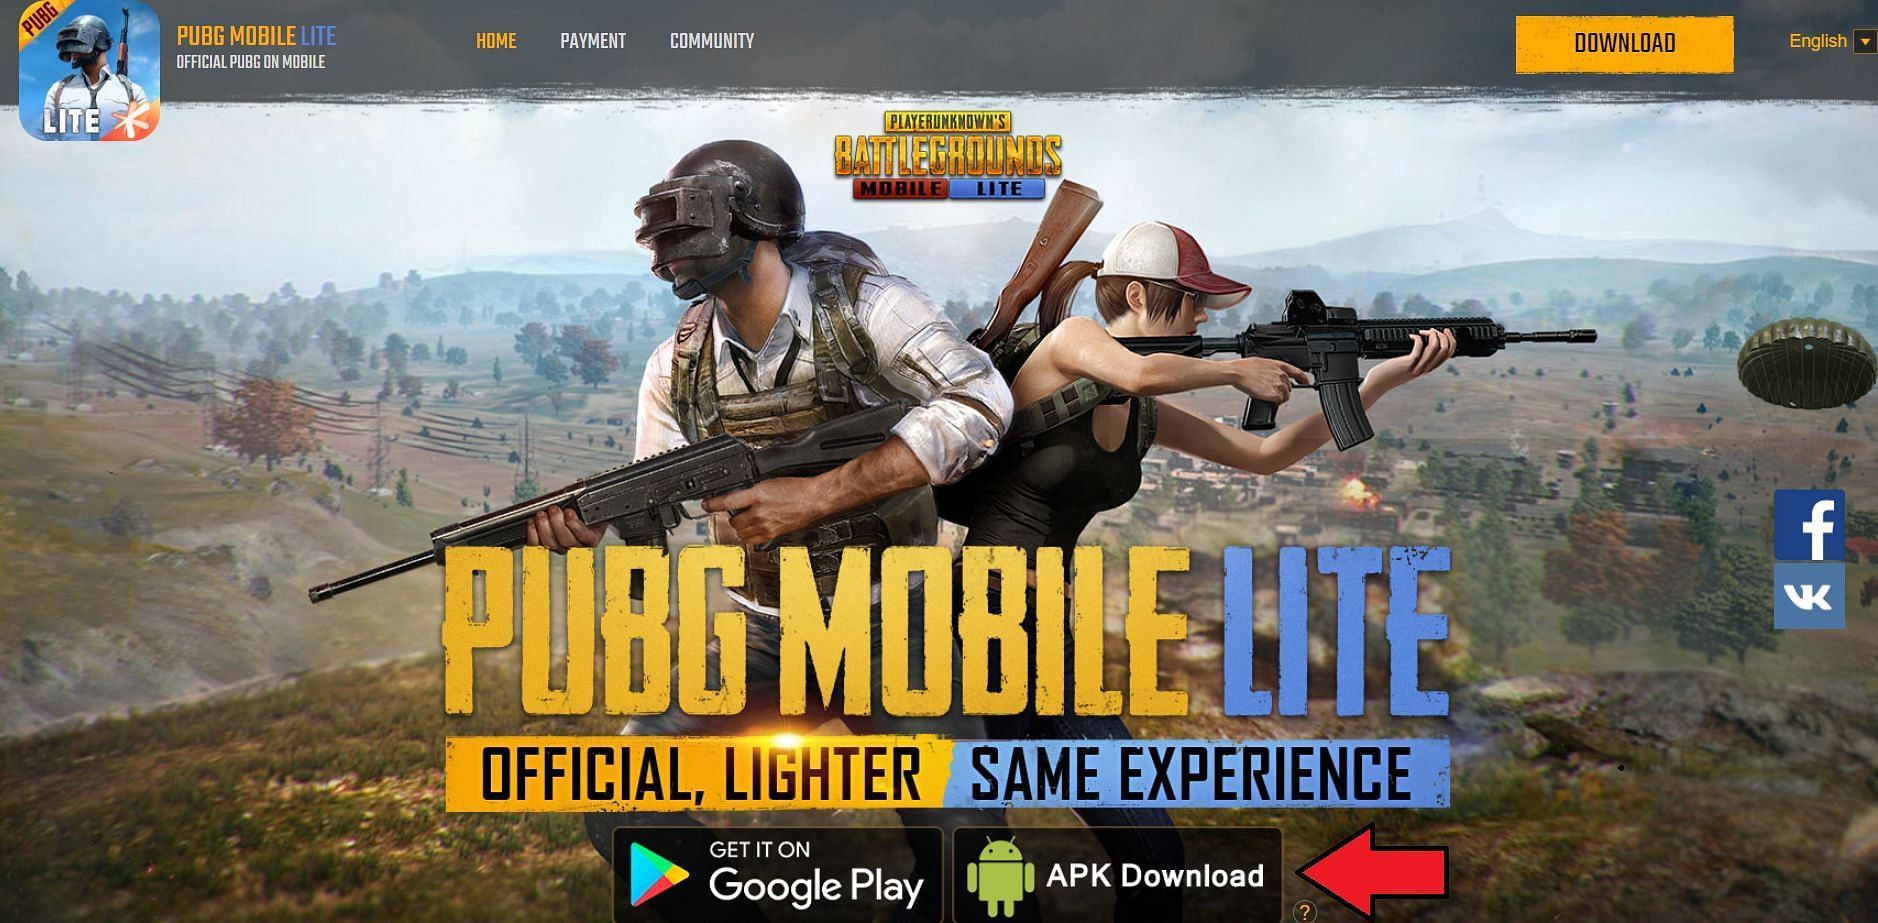 This option will commence the download process (Image via PUBG Mobile Lite)